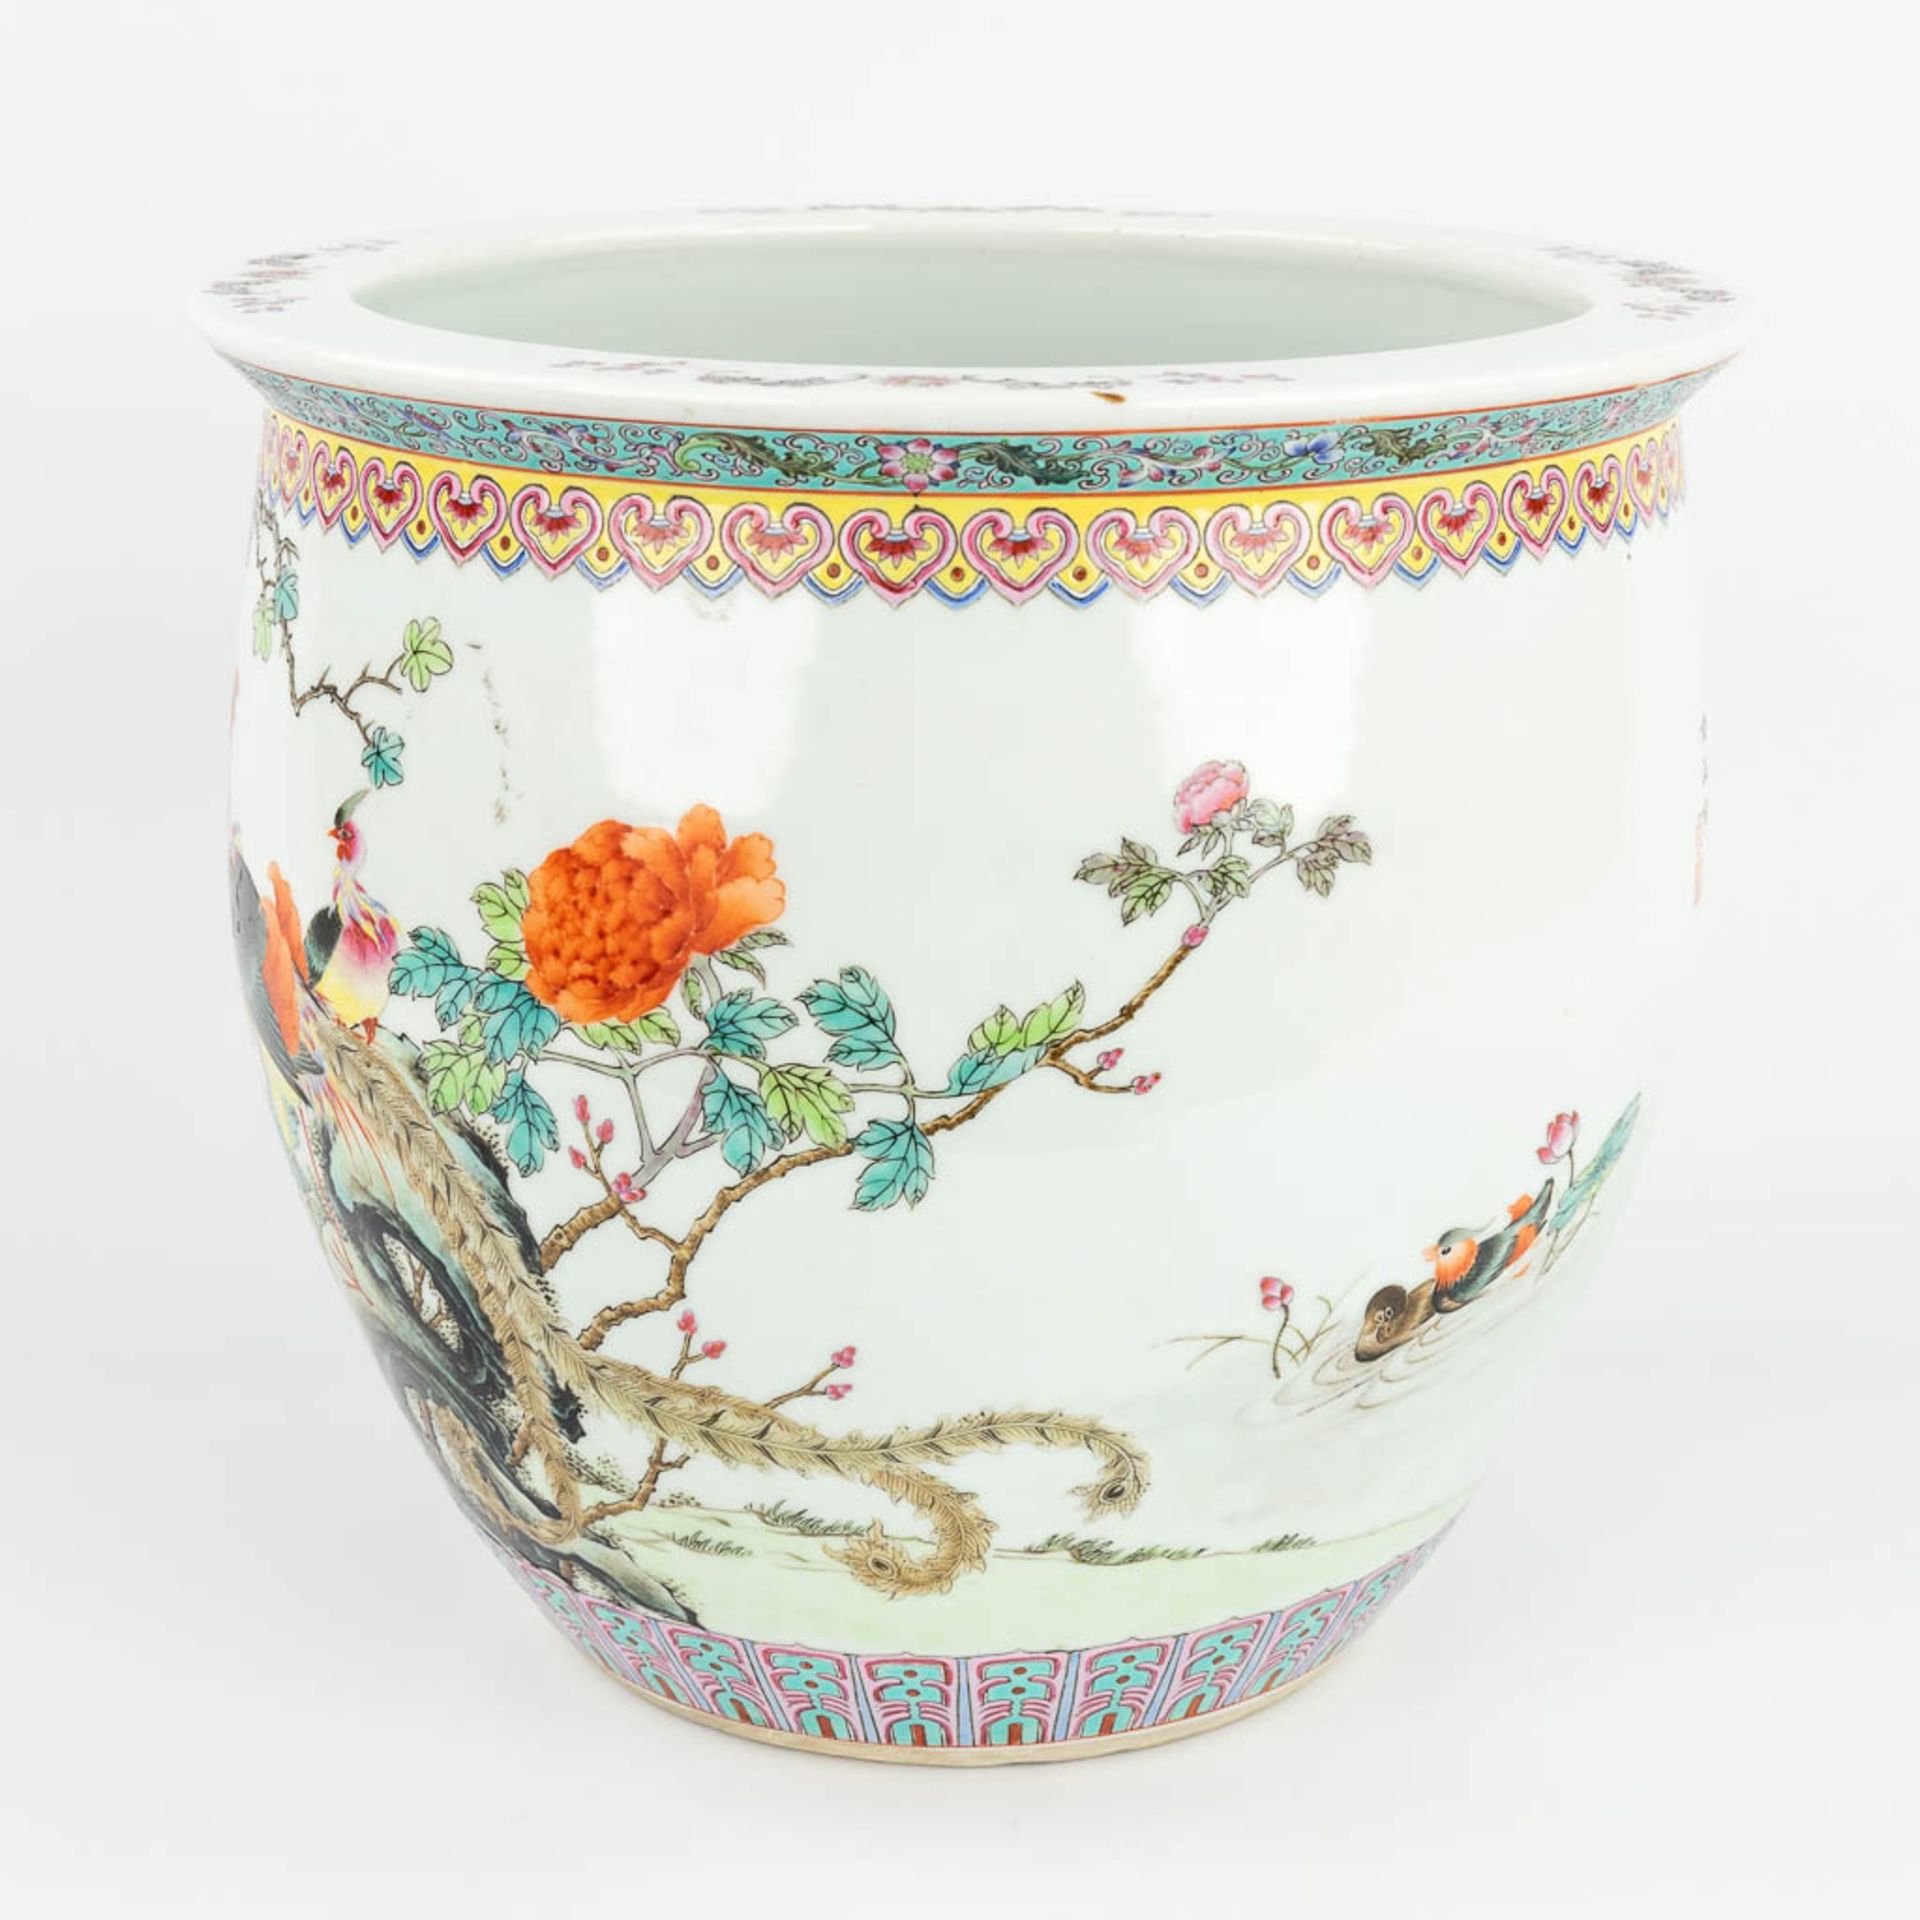 A Chinese cache pot made of porcelain and decorated with phoenixes. 20th C. (H:28 x D:31 cm) - Image 8 of 16